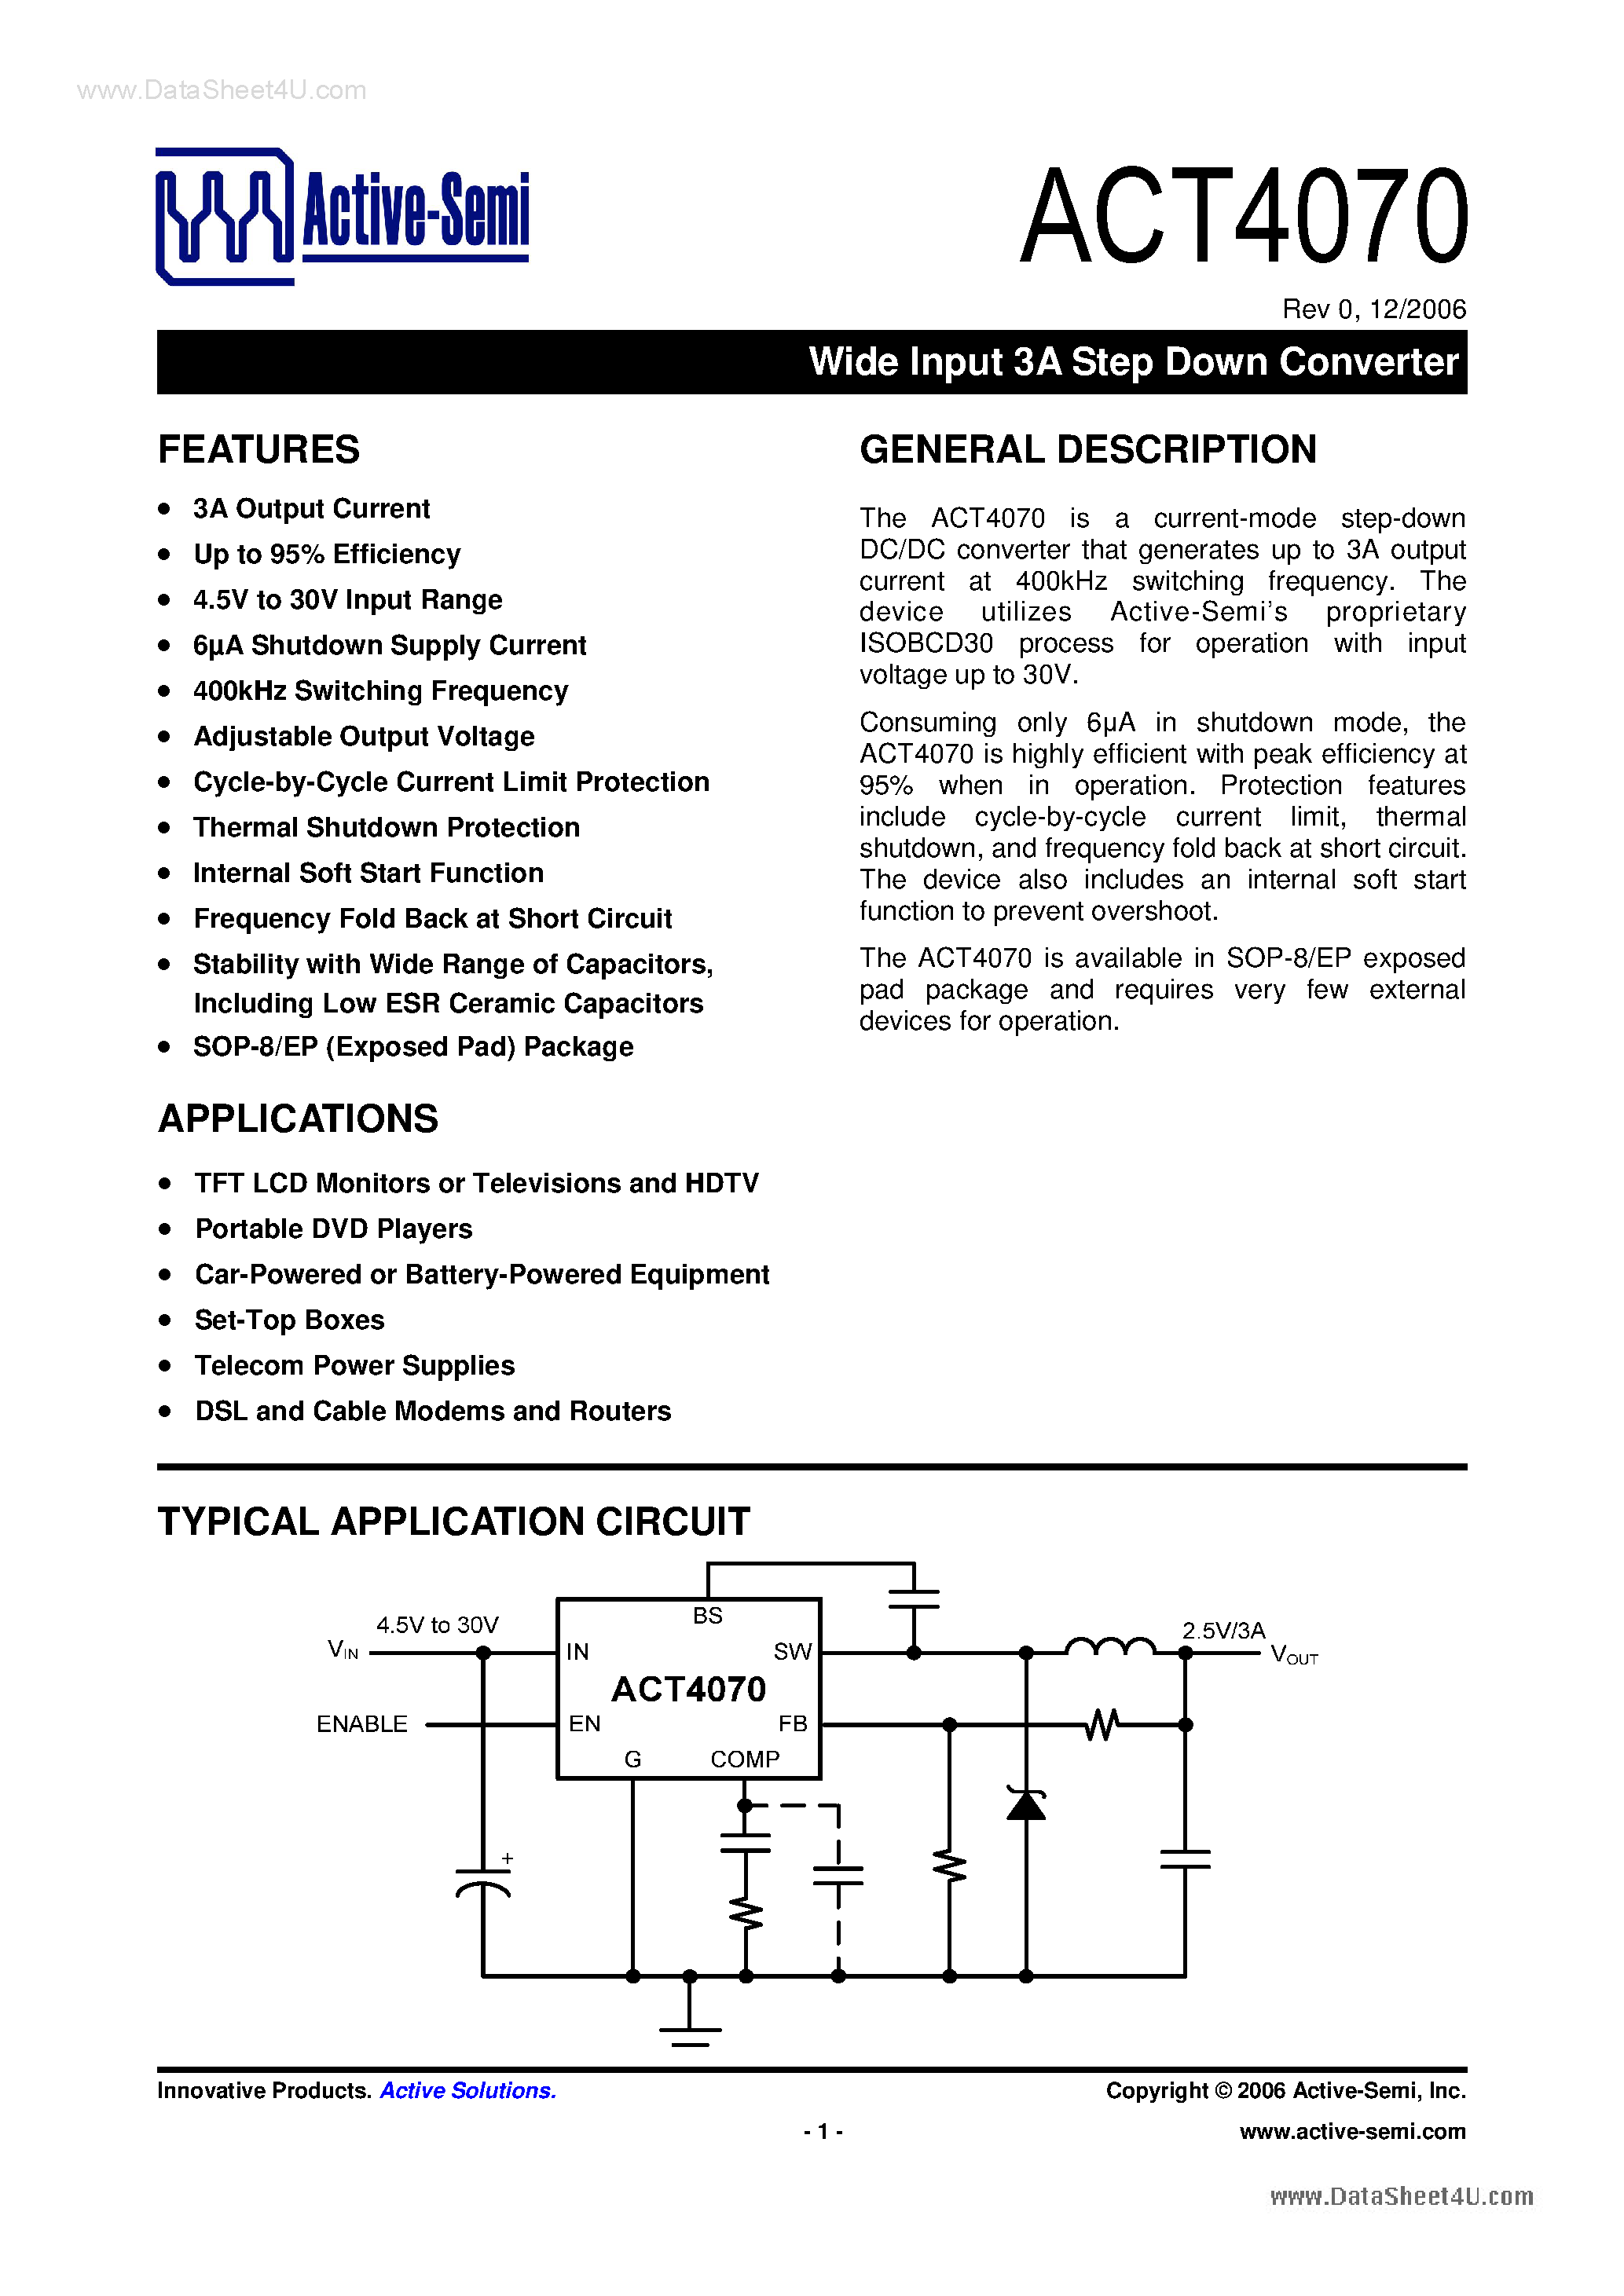 Datasheet ACT4070 - Wide Input 3A Step Down Converter page 1